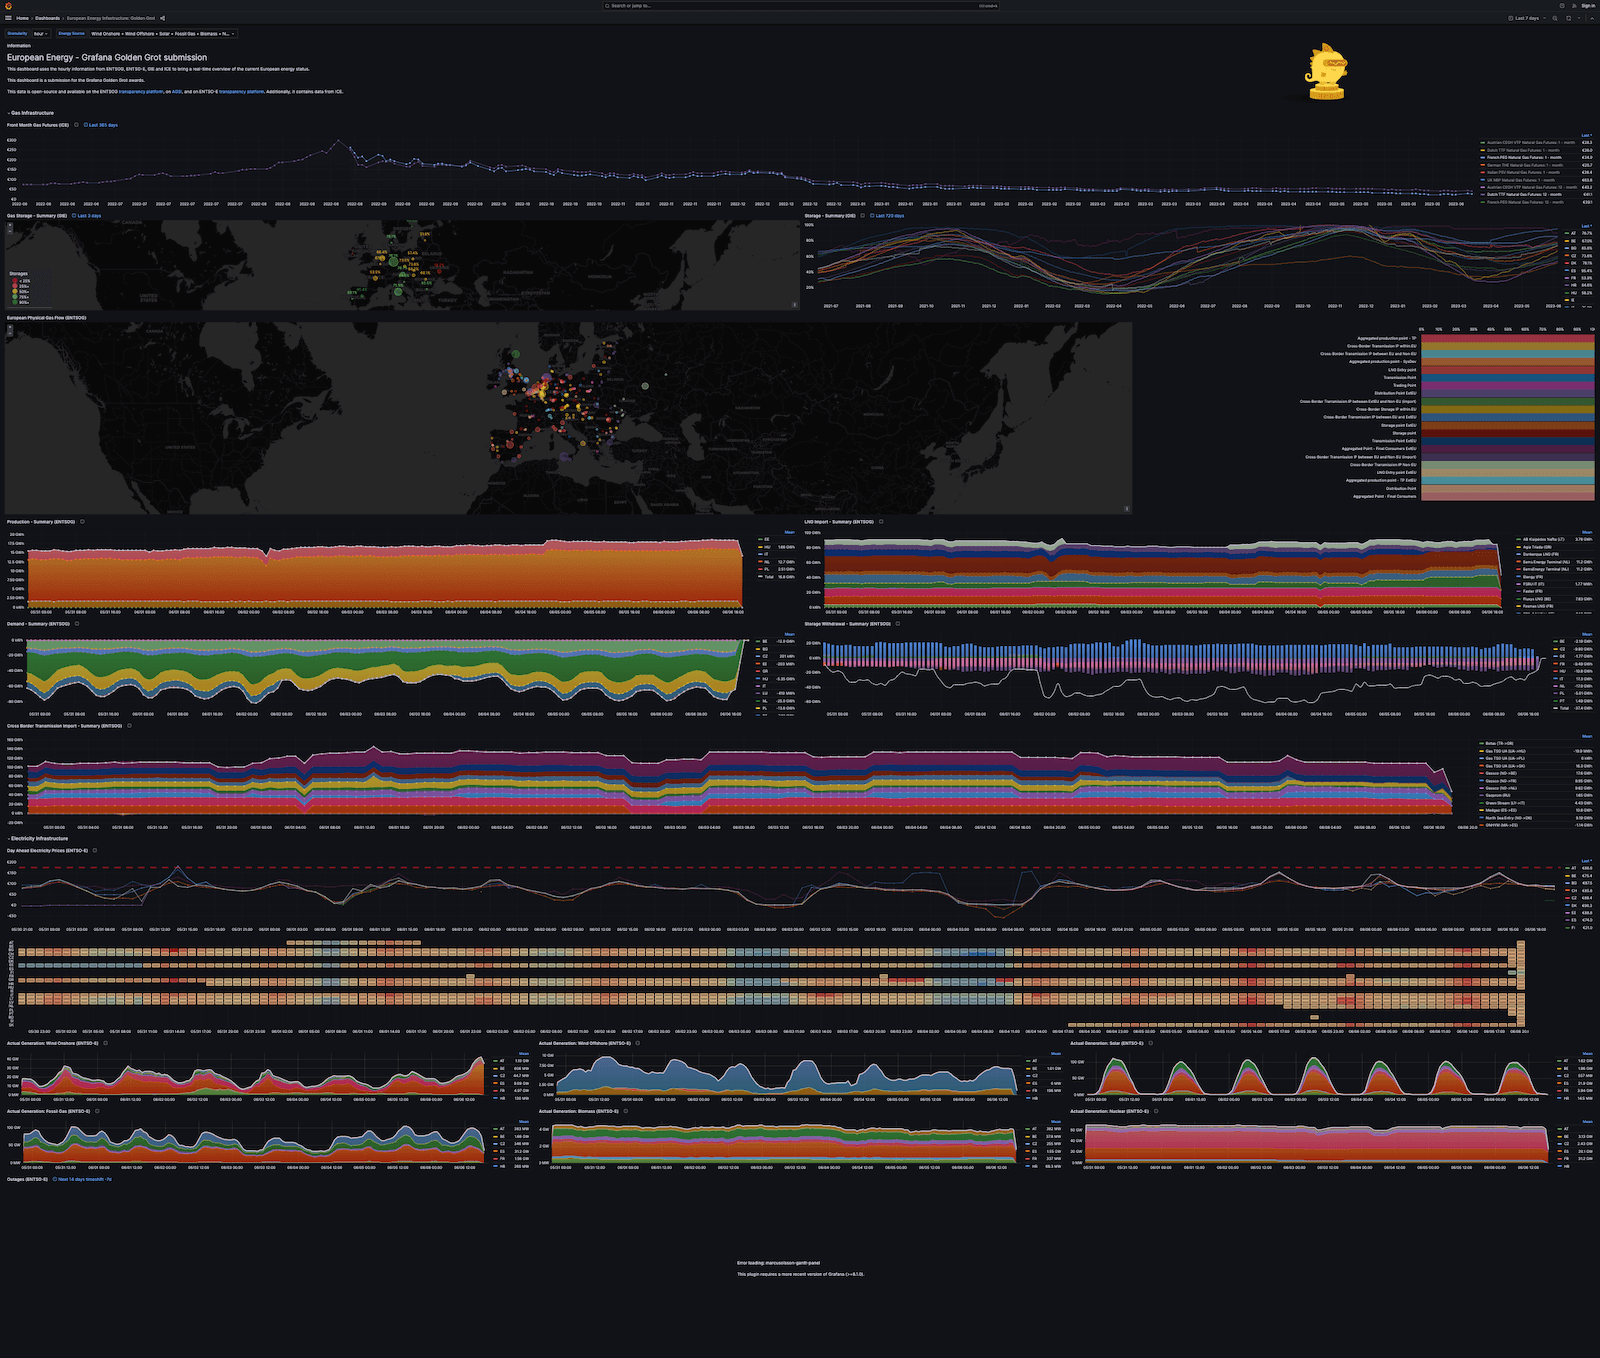 A screenshot of a Grafana dashboard monitoring the current state of the European energy infrastructure